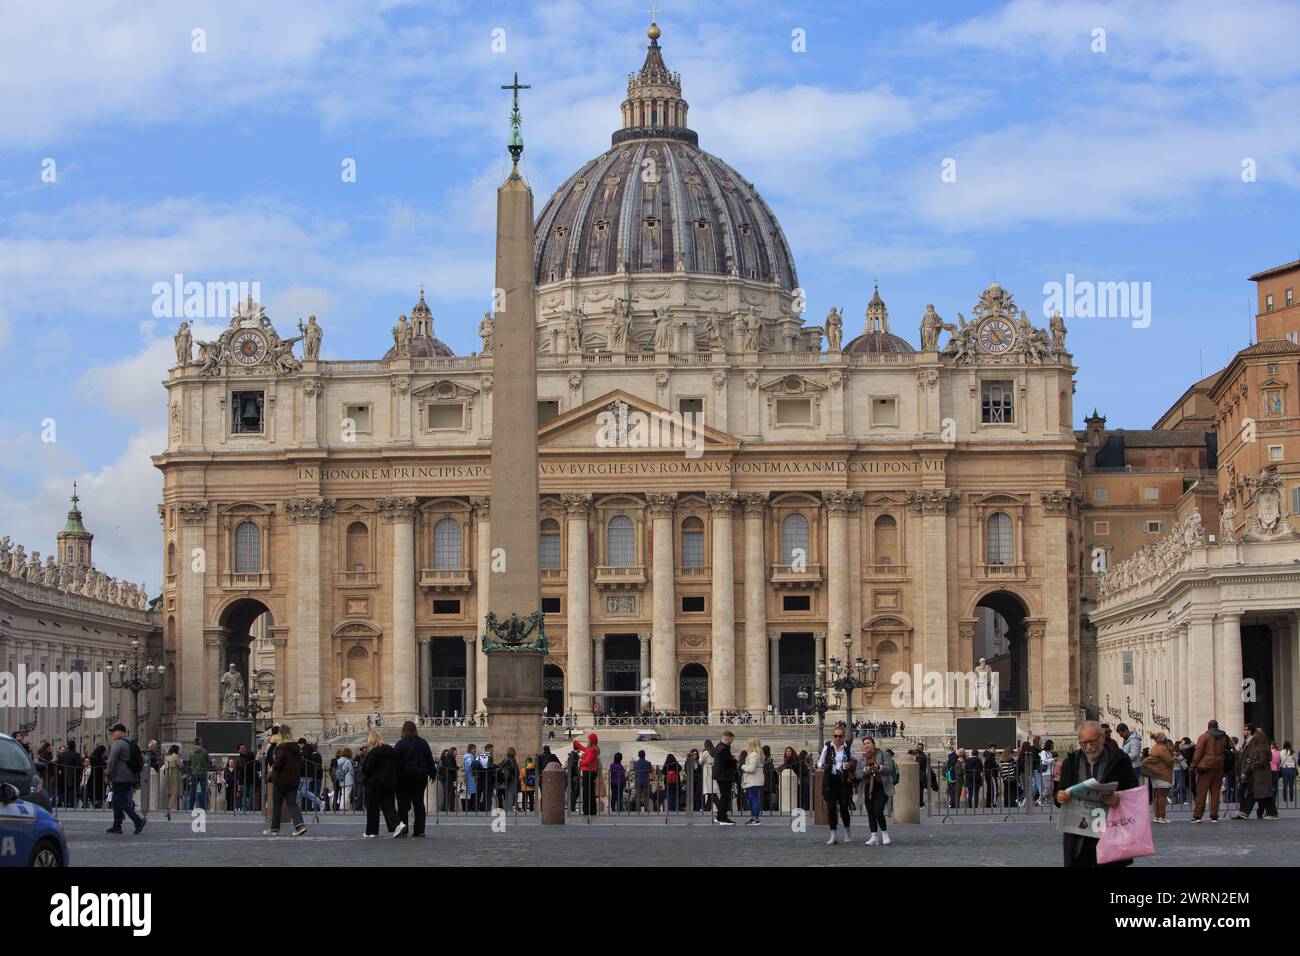 Rme, Italy, 22-02-24. St Peter's Basilica in the Vatican is where the pope holds Mass, and is a very popular place for tourists to visit Stock Photo